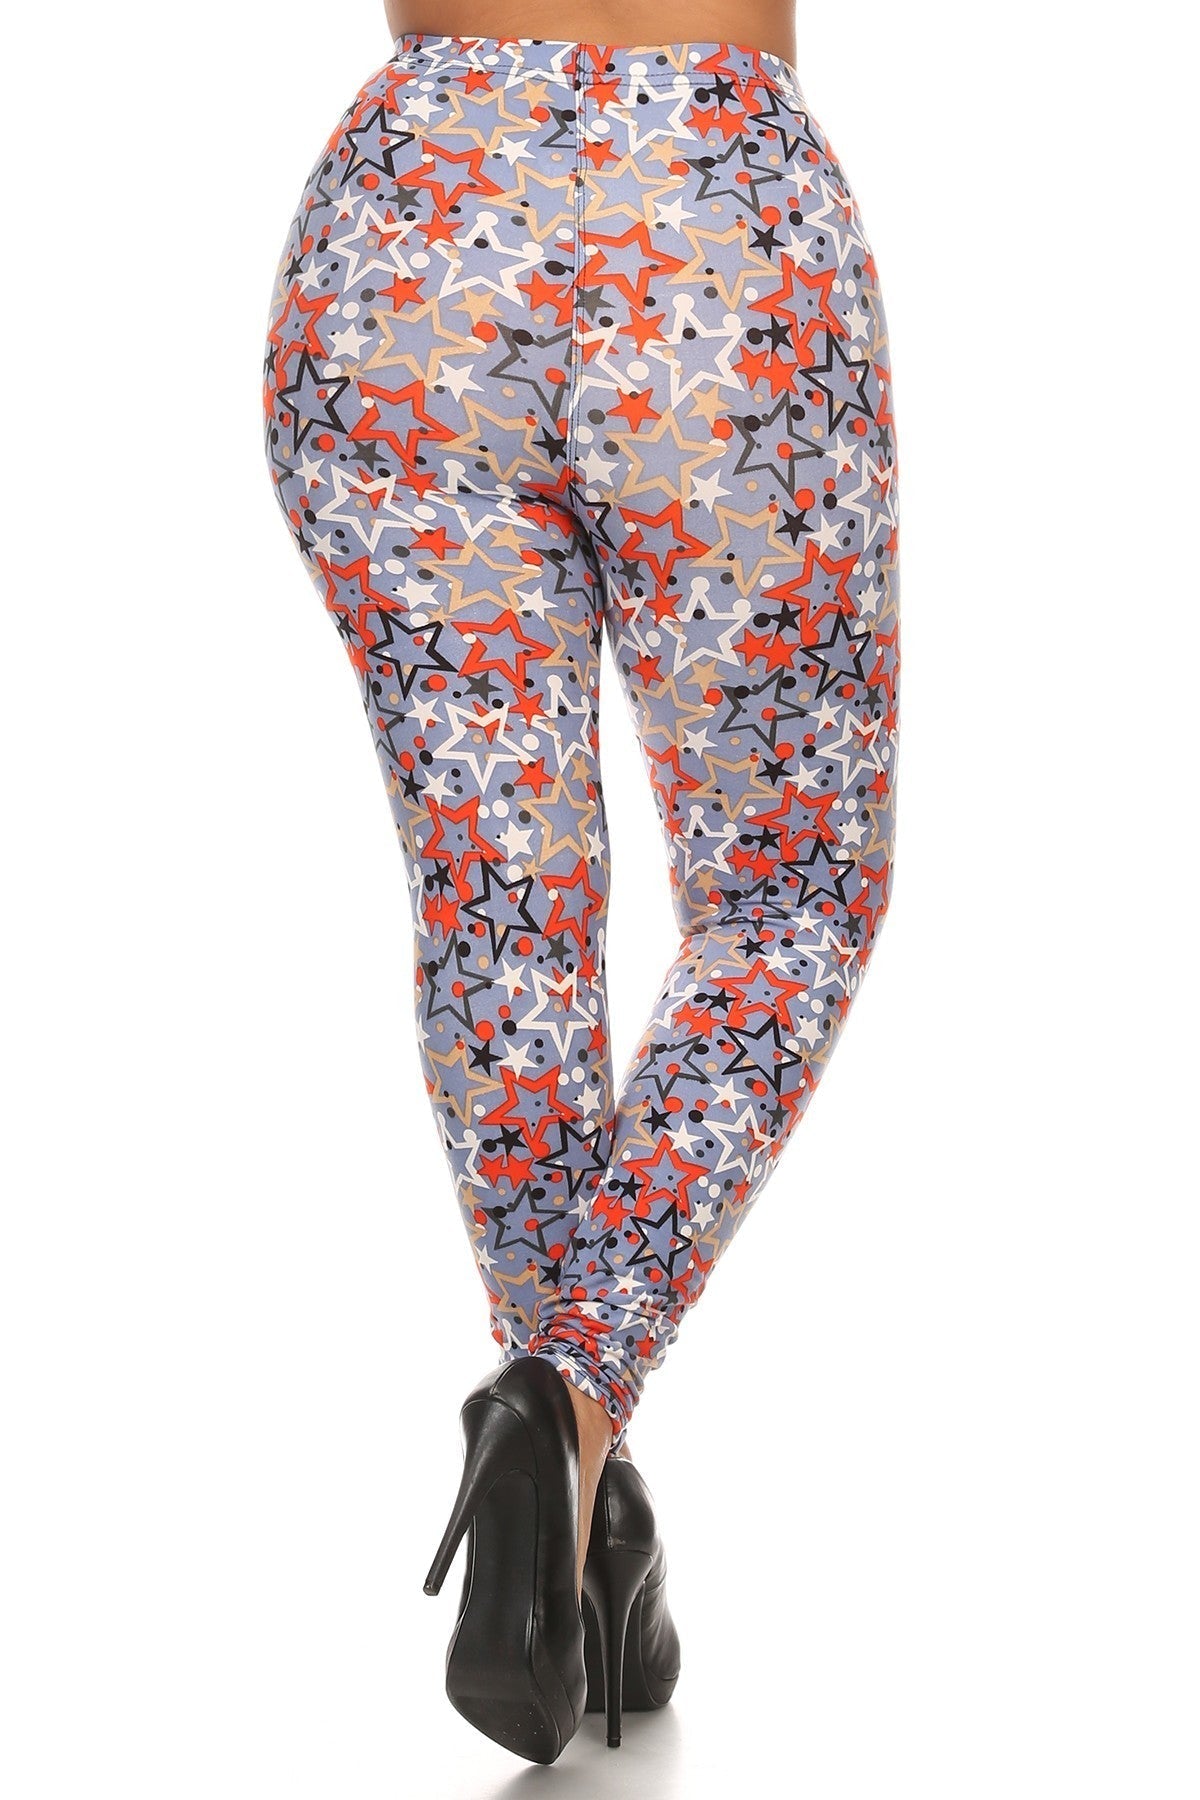 Plus Size Star Print, Full Length Leggings In A Slim Fitting Style With A Banded High Waist Bottoms jehouze 